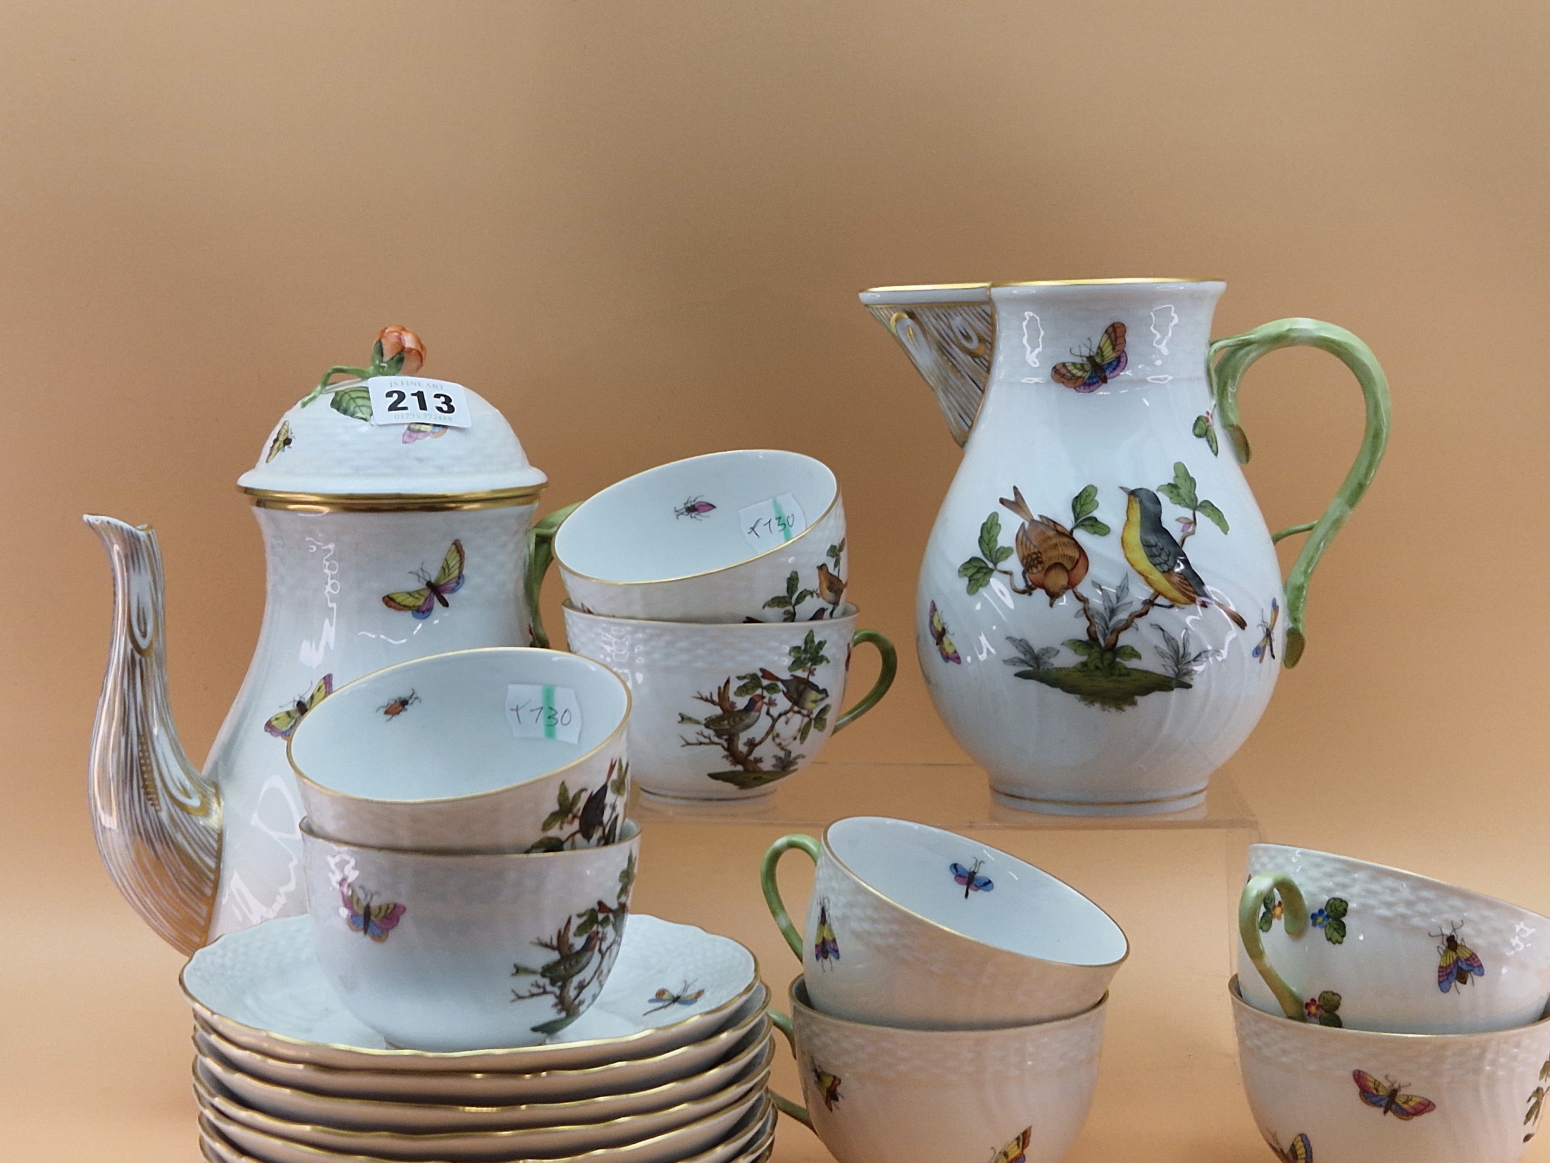 A HEREND PART TEA AND COFFEE SET, COMPRISING: EIGHT CUPS AND SAUCERS, A MILK JUG, A COVERED TEA - Image 3 of 8